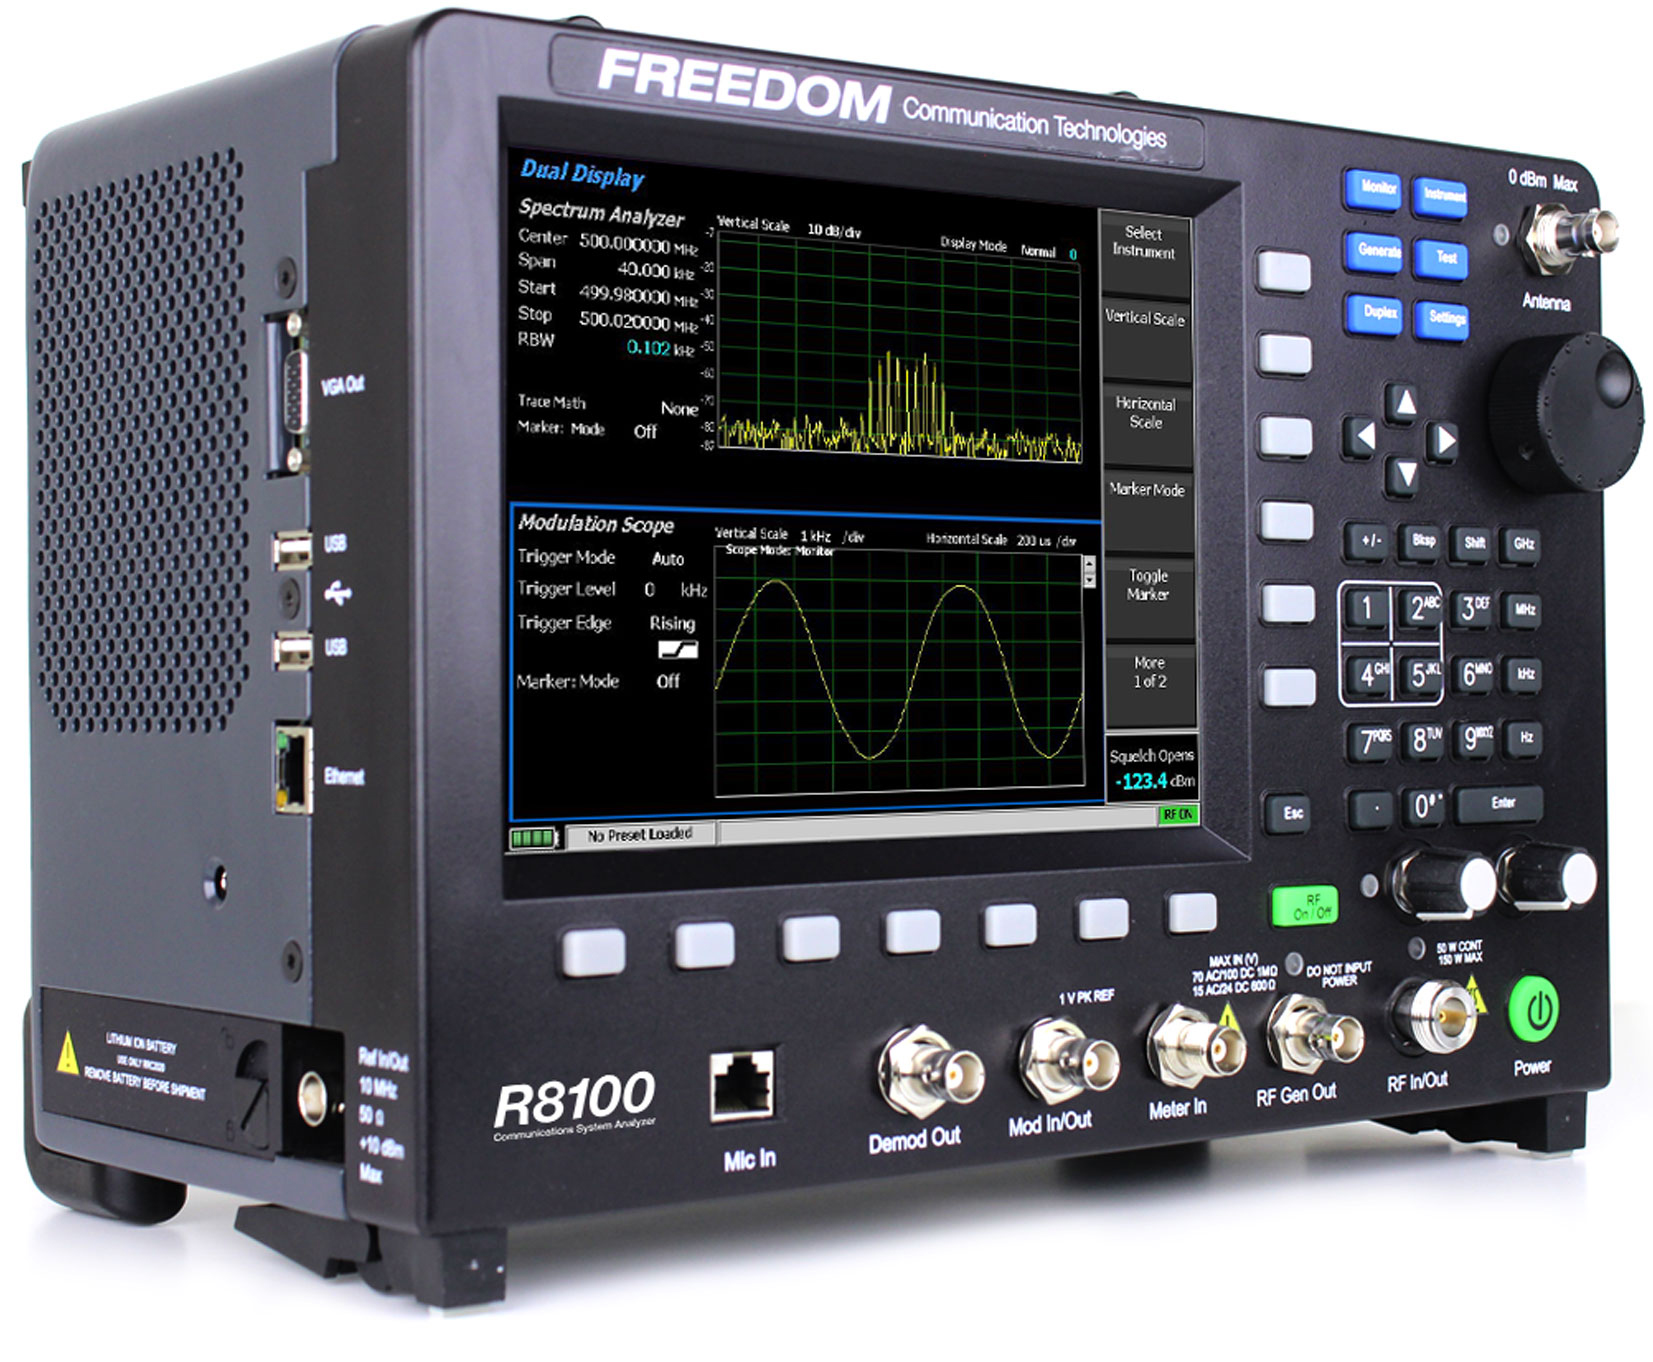 Dallas Avionics is now an authorized distributor of the entire Freedom line of communications test equipment from Astronics. Dallas Avionics Photo